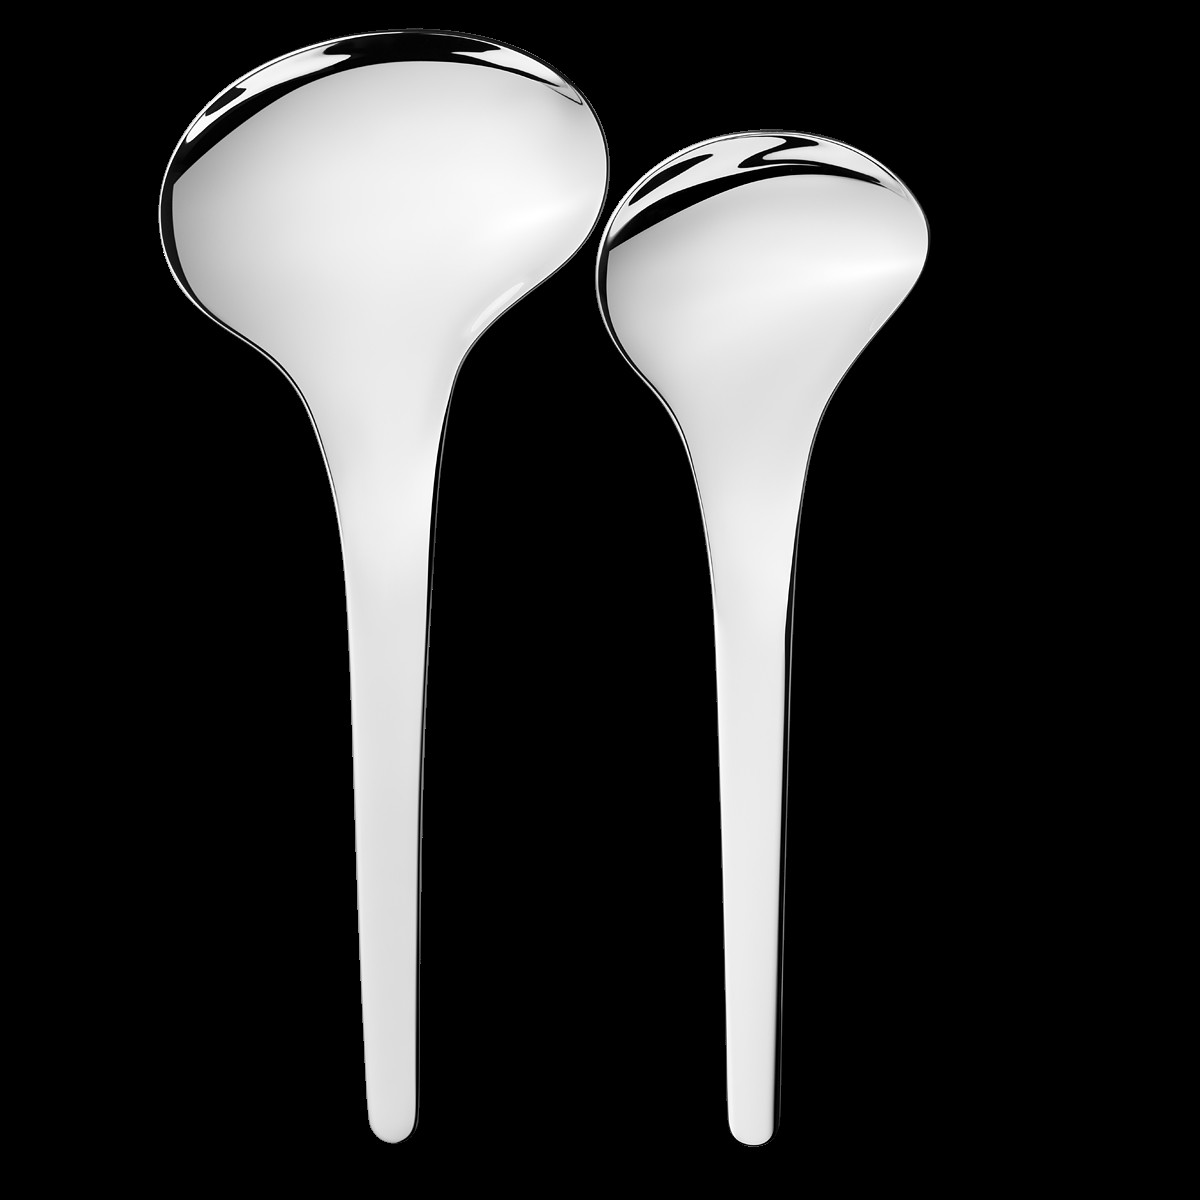 26 Famous Georg Jensen Cafu Vase 2024 free download georg jensen cafu vase of bloom serving spoon set 2 pcs in stainless steel georg jensen with regard to pack 3391347 1200 0